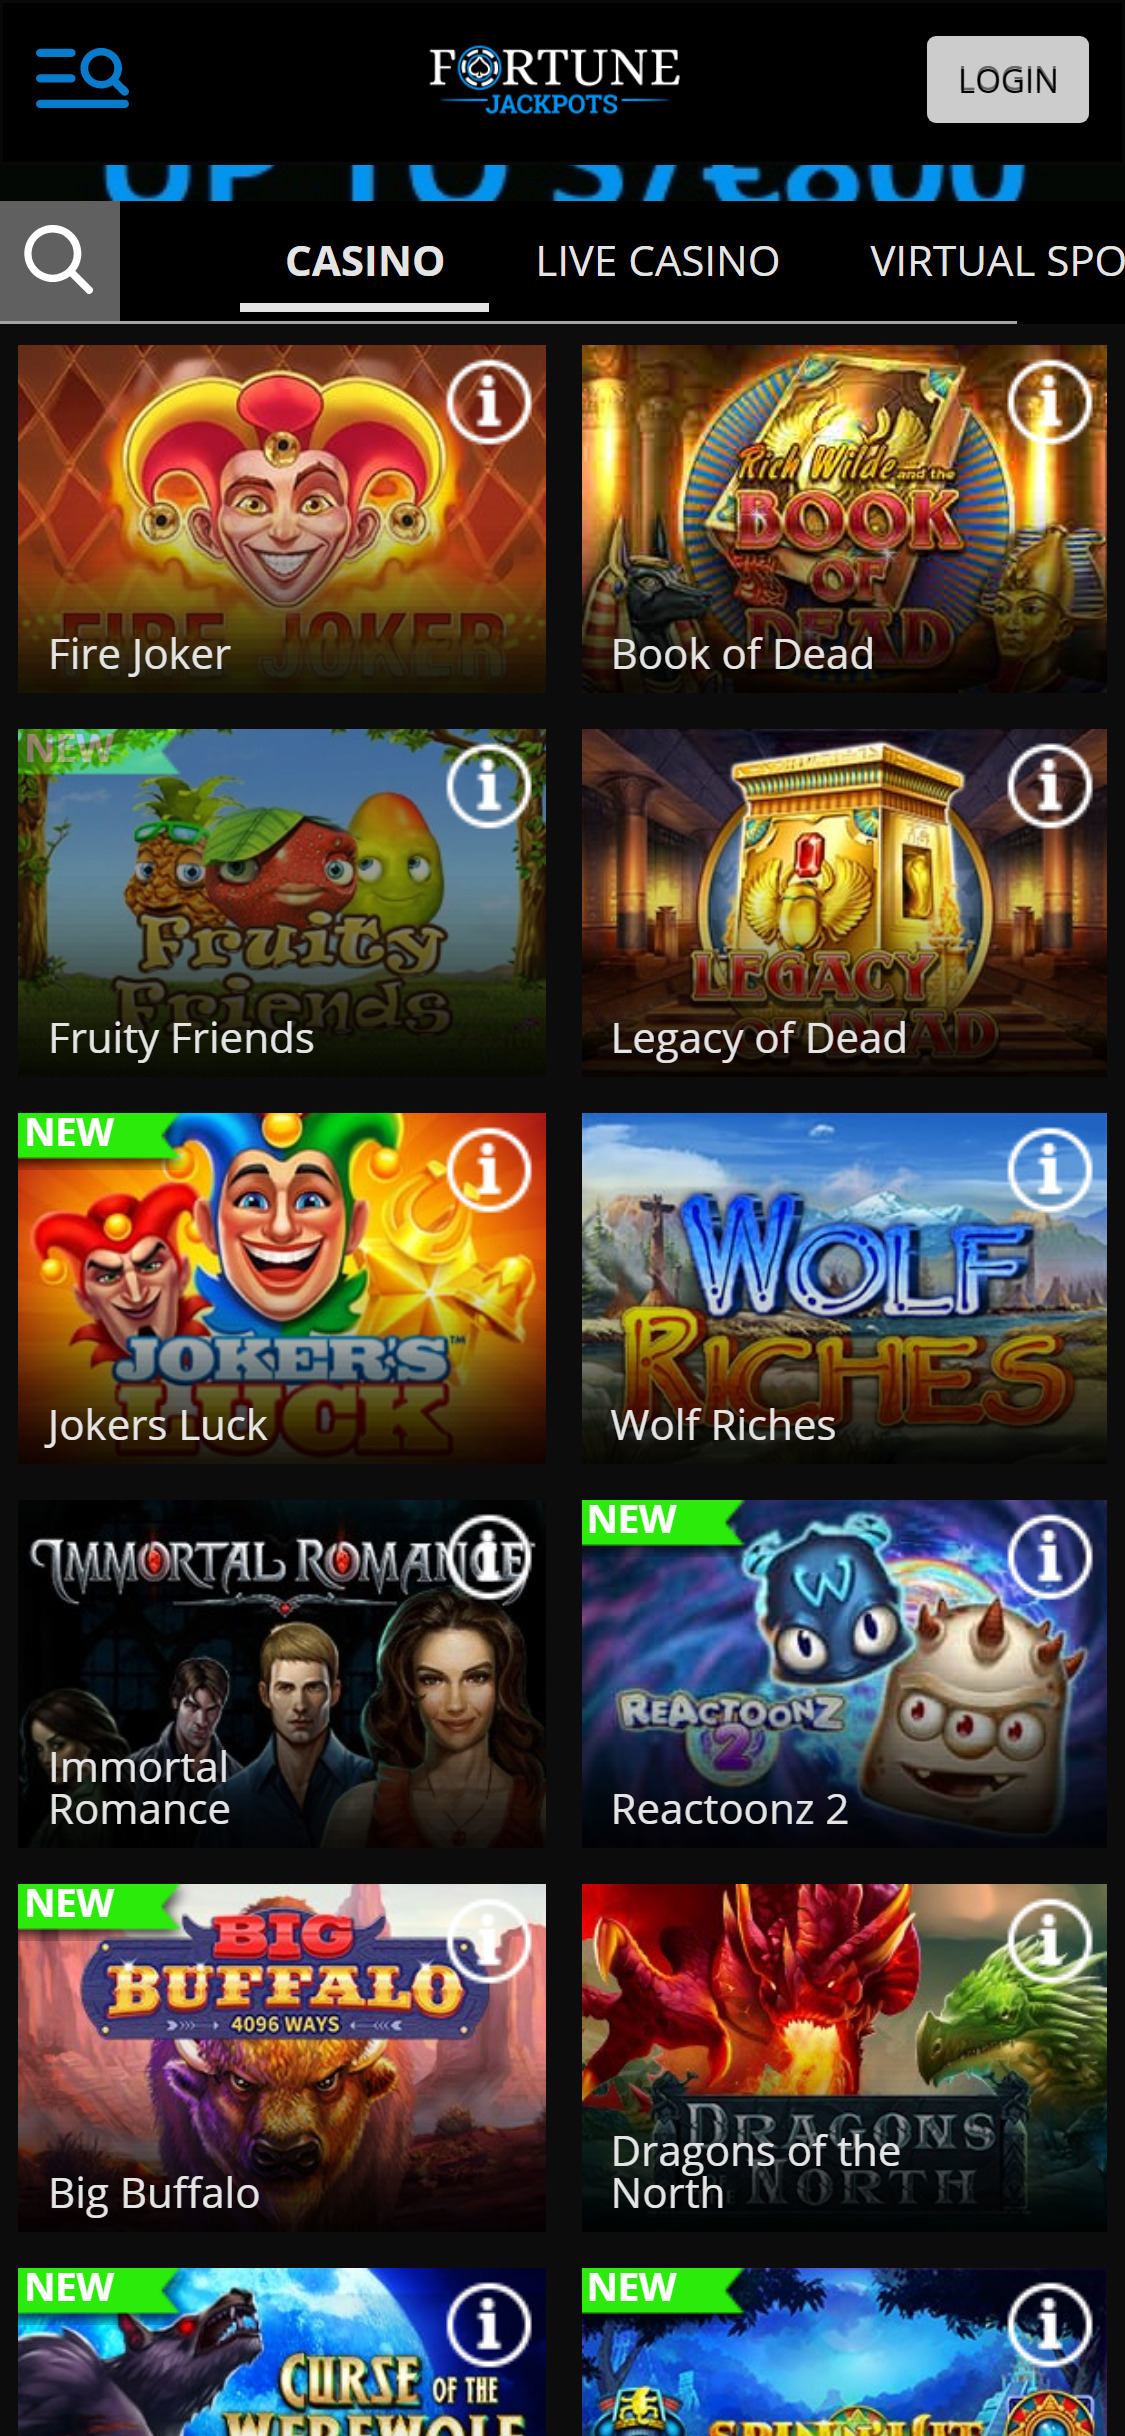 Fortune Jackpots Casino Mobile Games Review